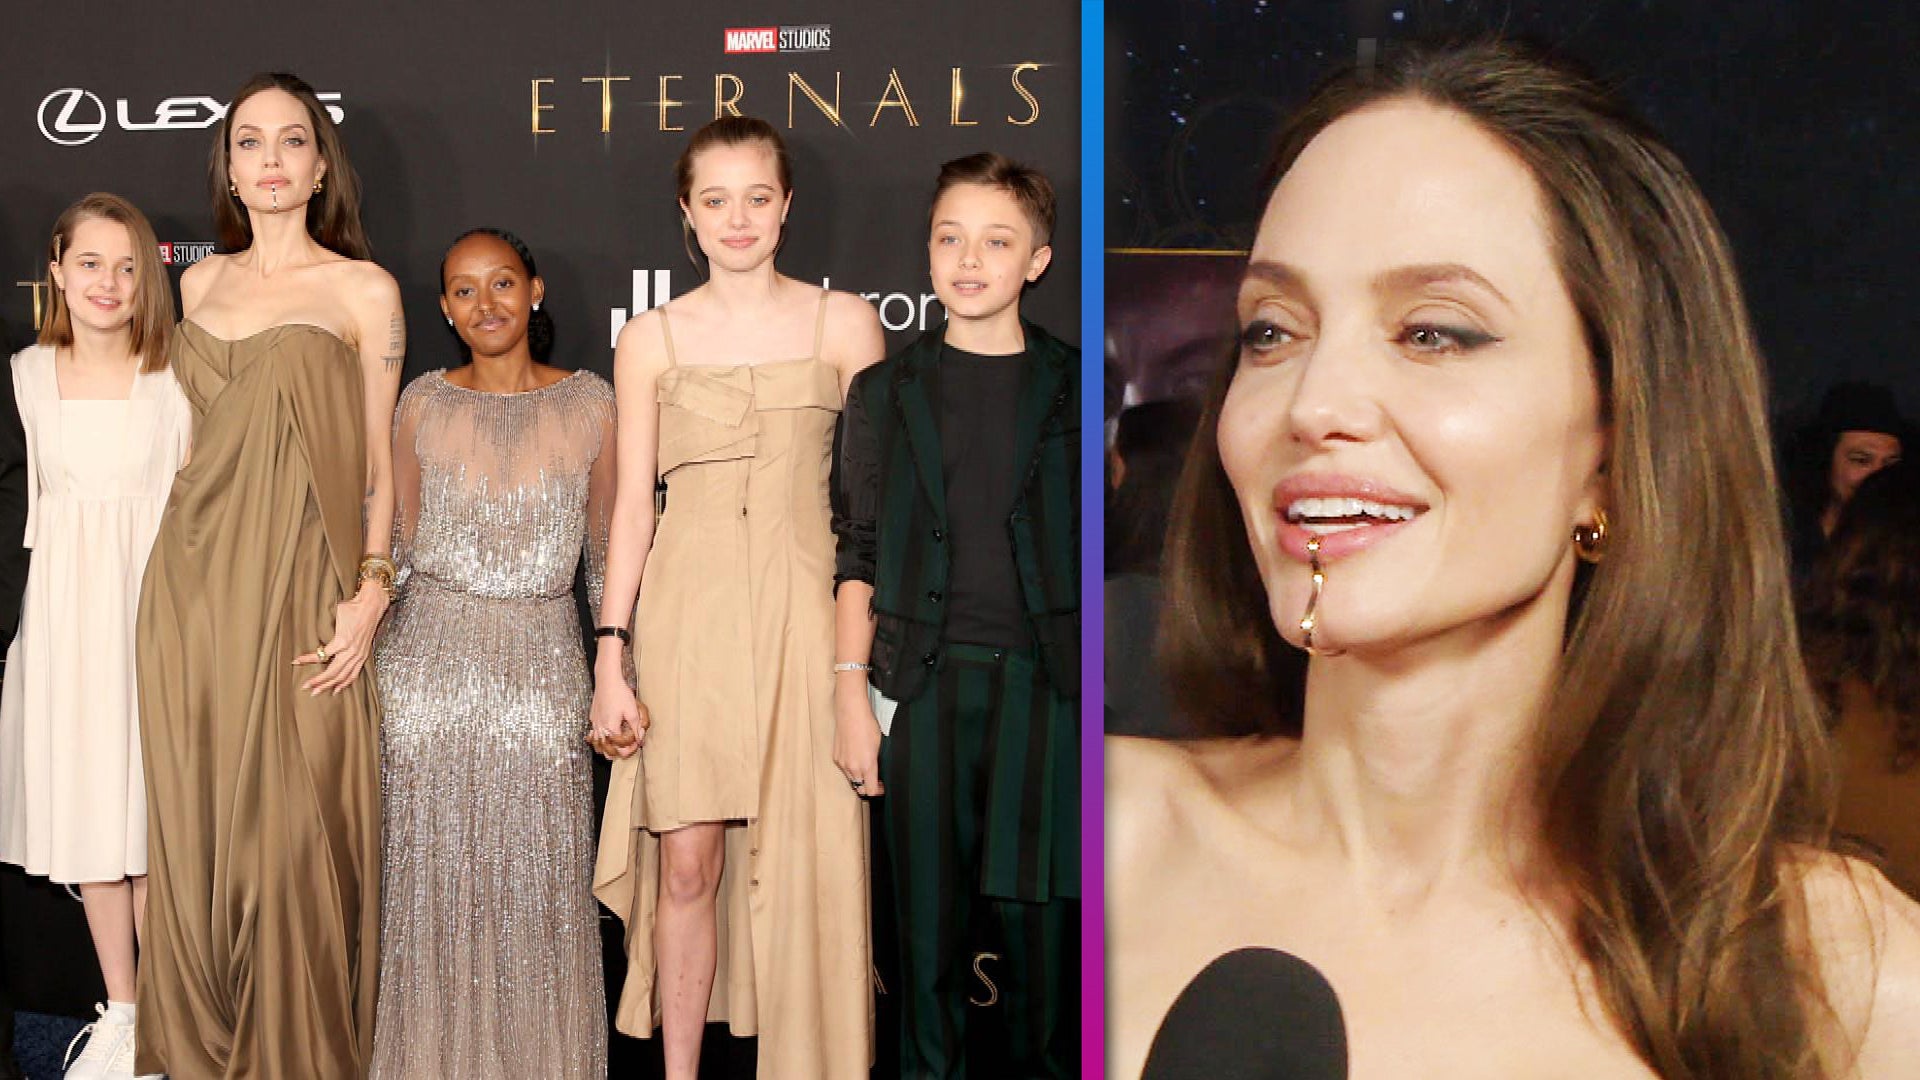 Angelina Jolie's Outfits: See Pieces Perfect For Your Work